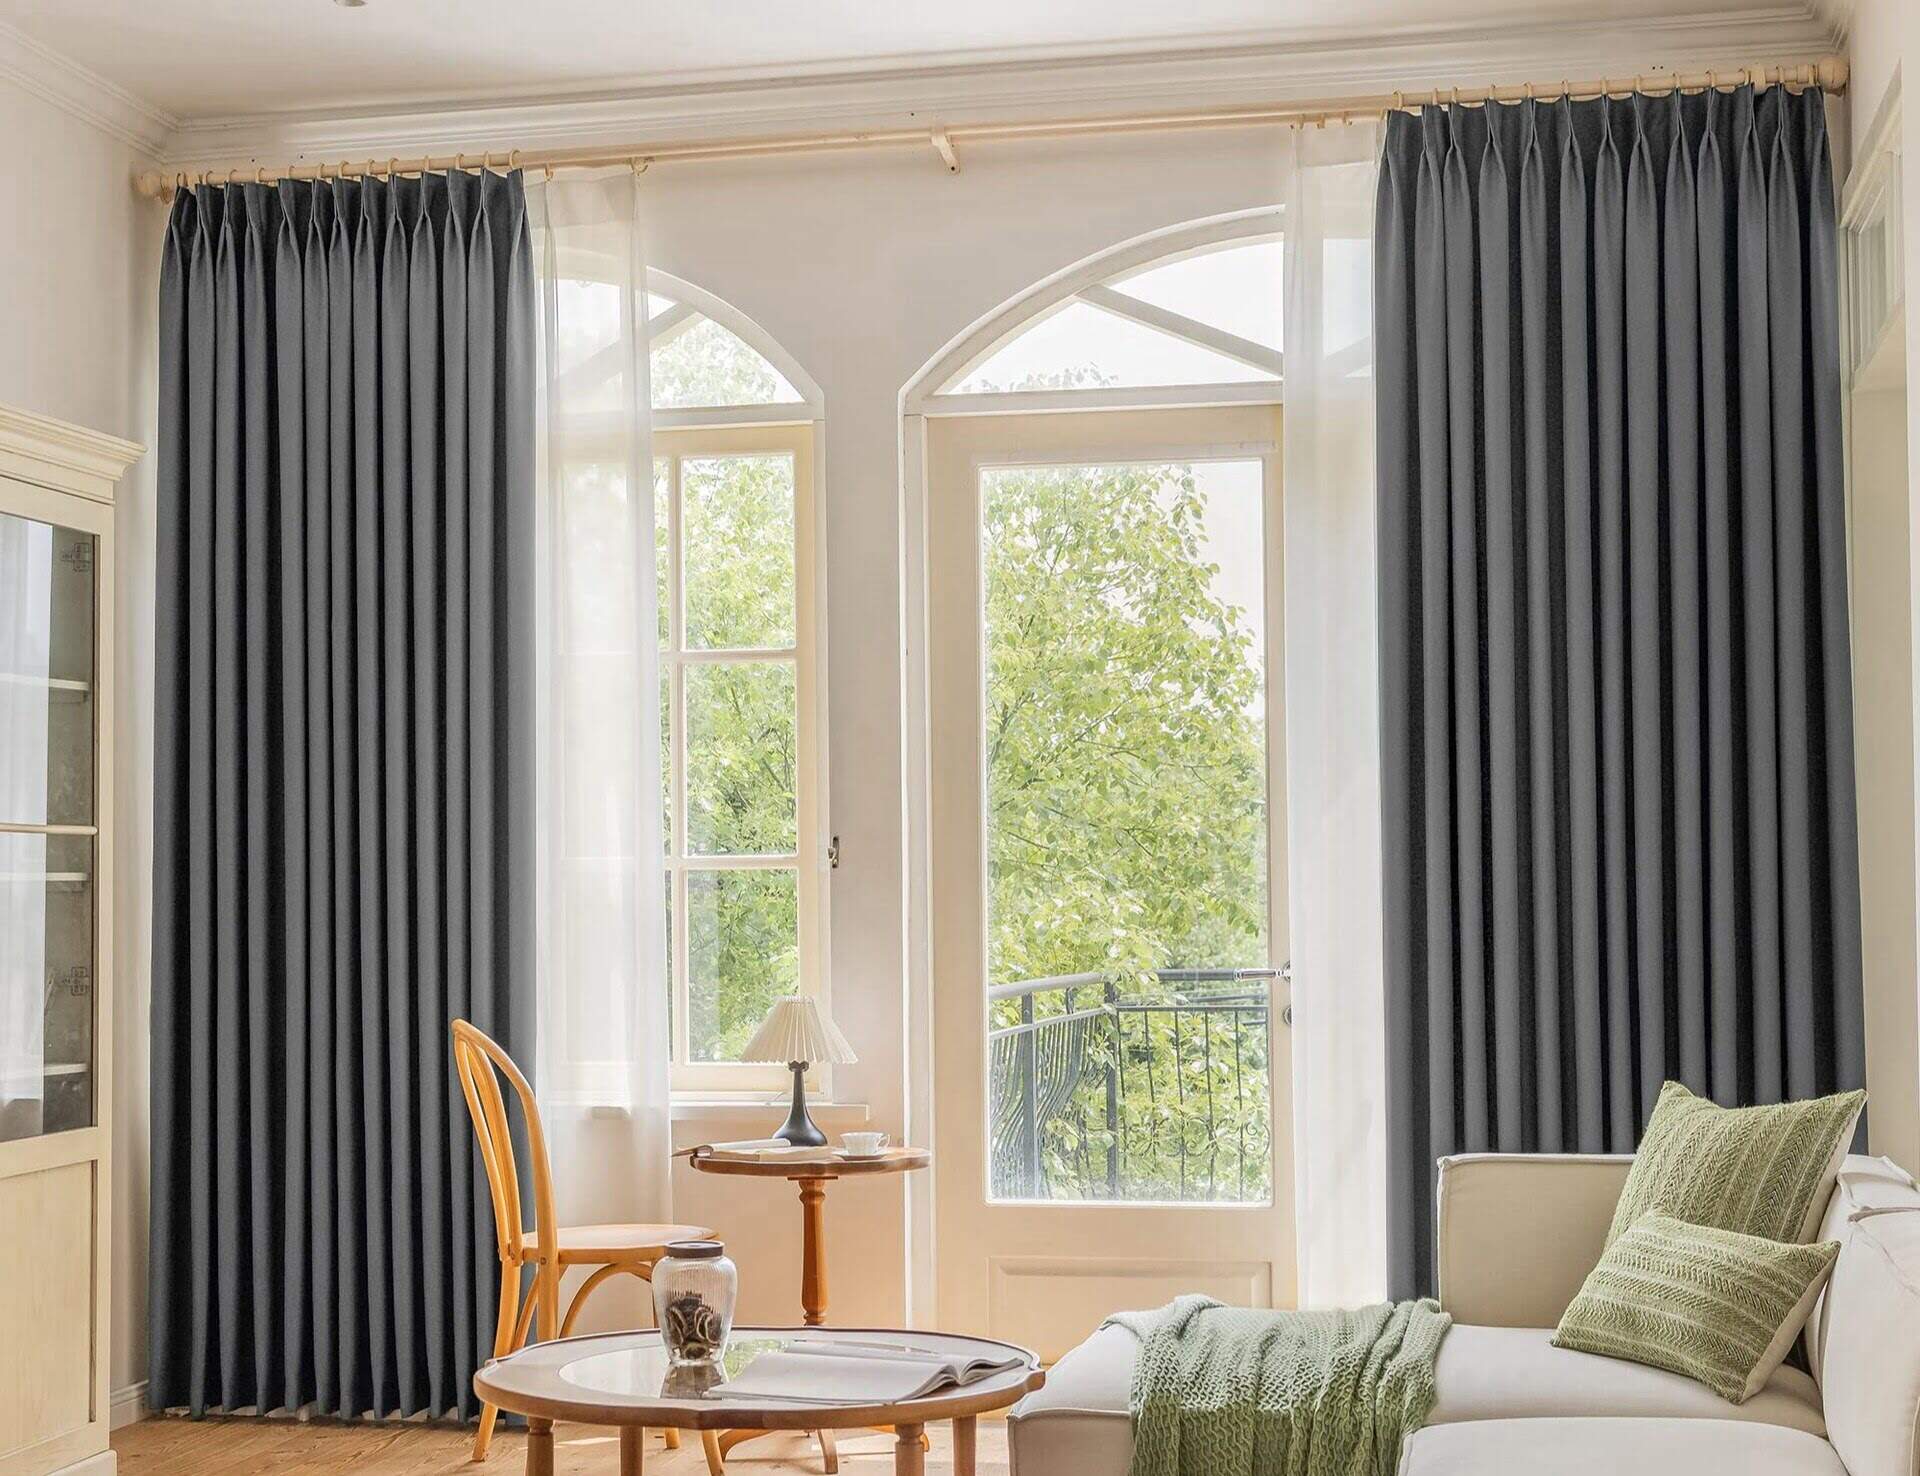 How To Hang Sheer And Blackout Curtains Together